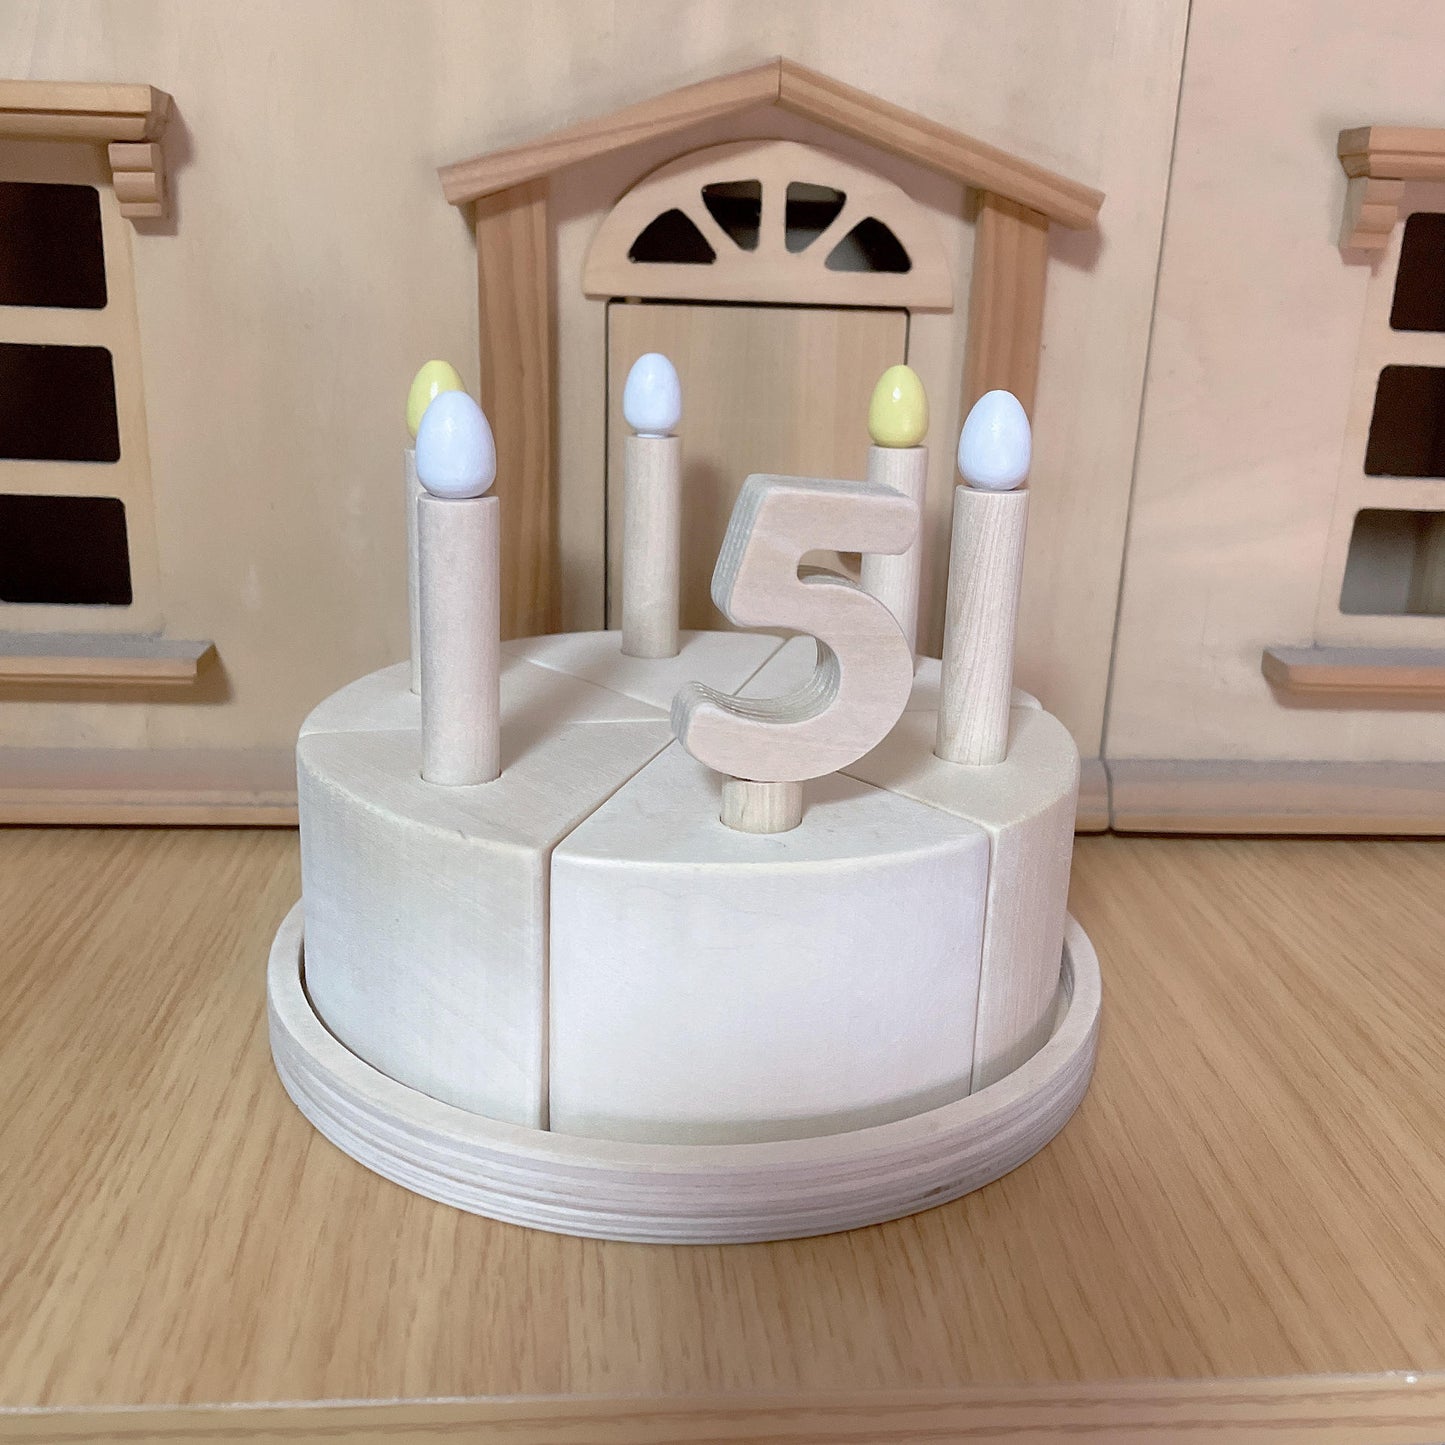 Wooden pretend cake set in front of wooden toy house